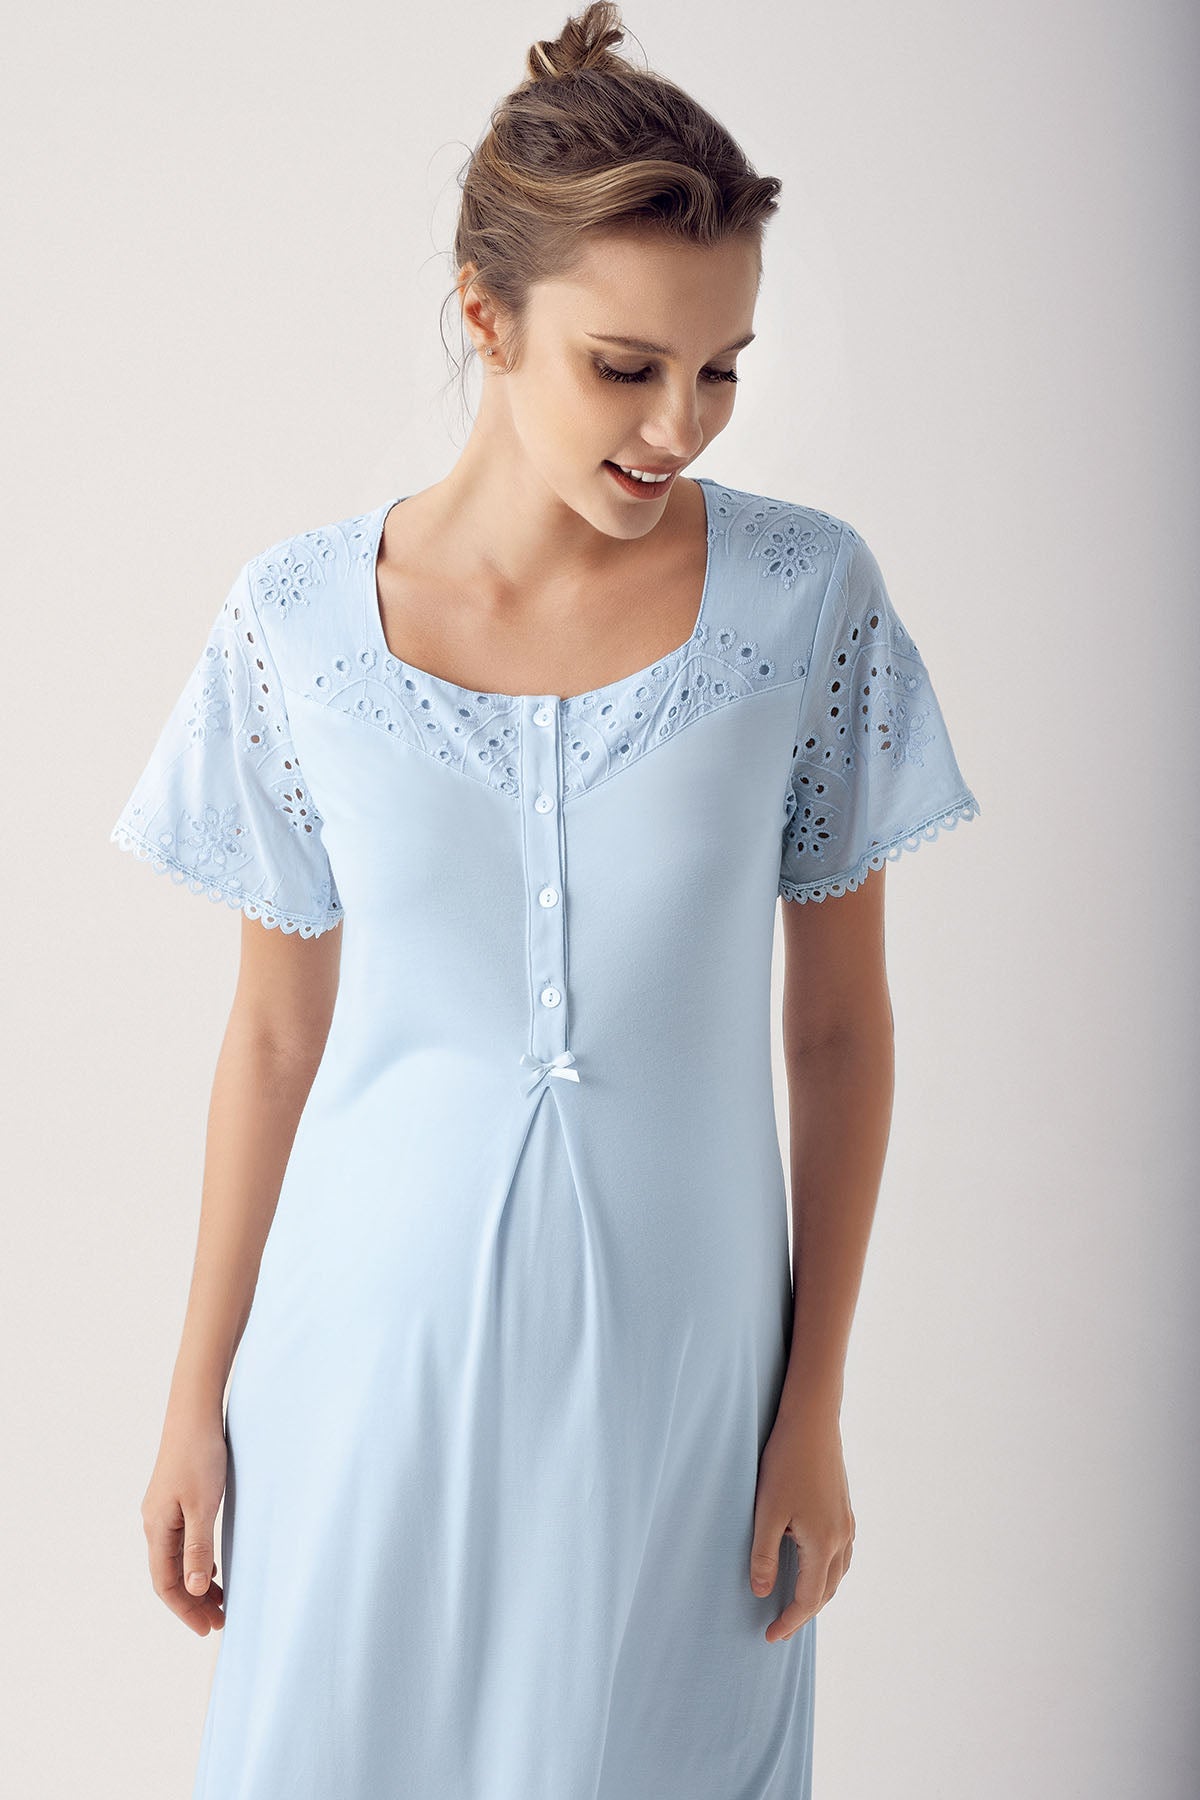 Motif Embroidered Maternity & Nursing Nightgown With Robe Blue - 14400